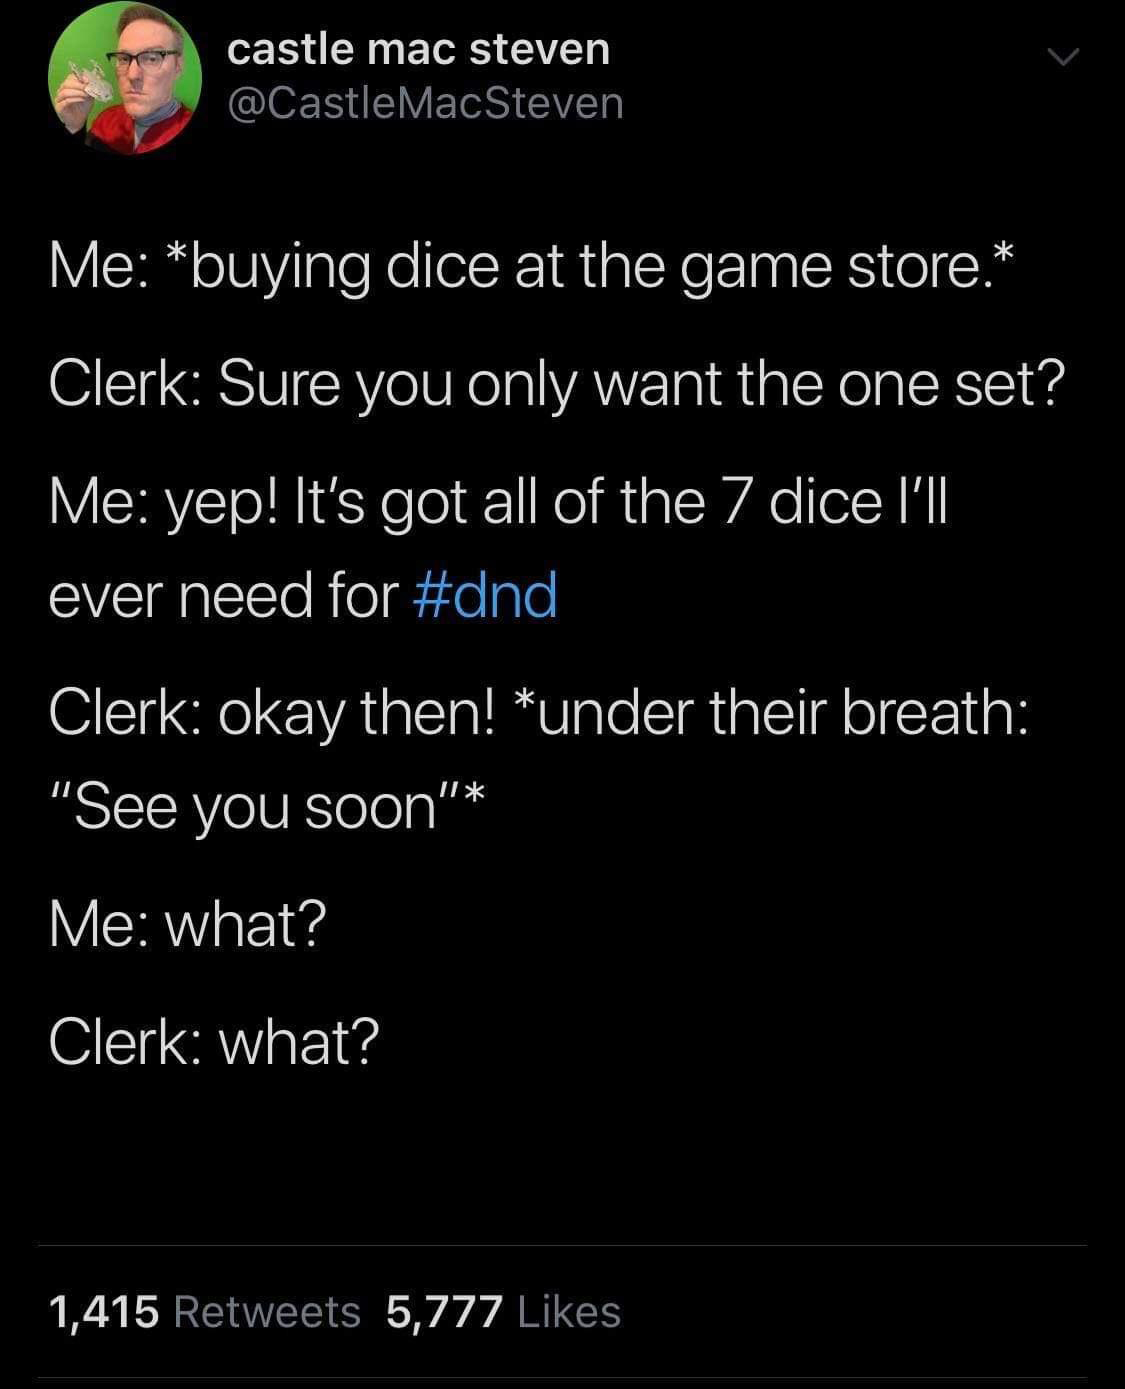 fucl the patriarchy - castle mac steven Steven Me buying dice at the game store. Clerk Sure you only want the one set? Me yep! It's got all of the 7 dice I'll ever need for Clerk okay then! under their breath "See you soon" Me what? Clerk what? 1,415 5,77